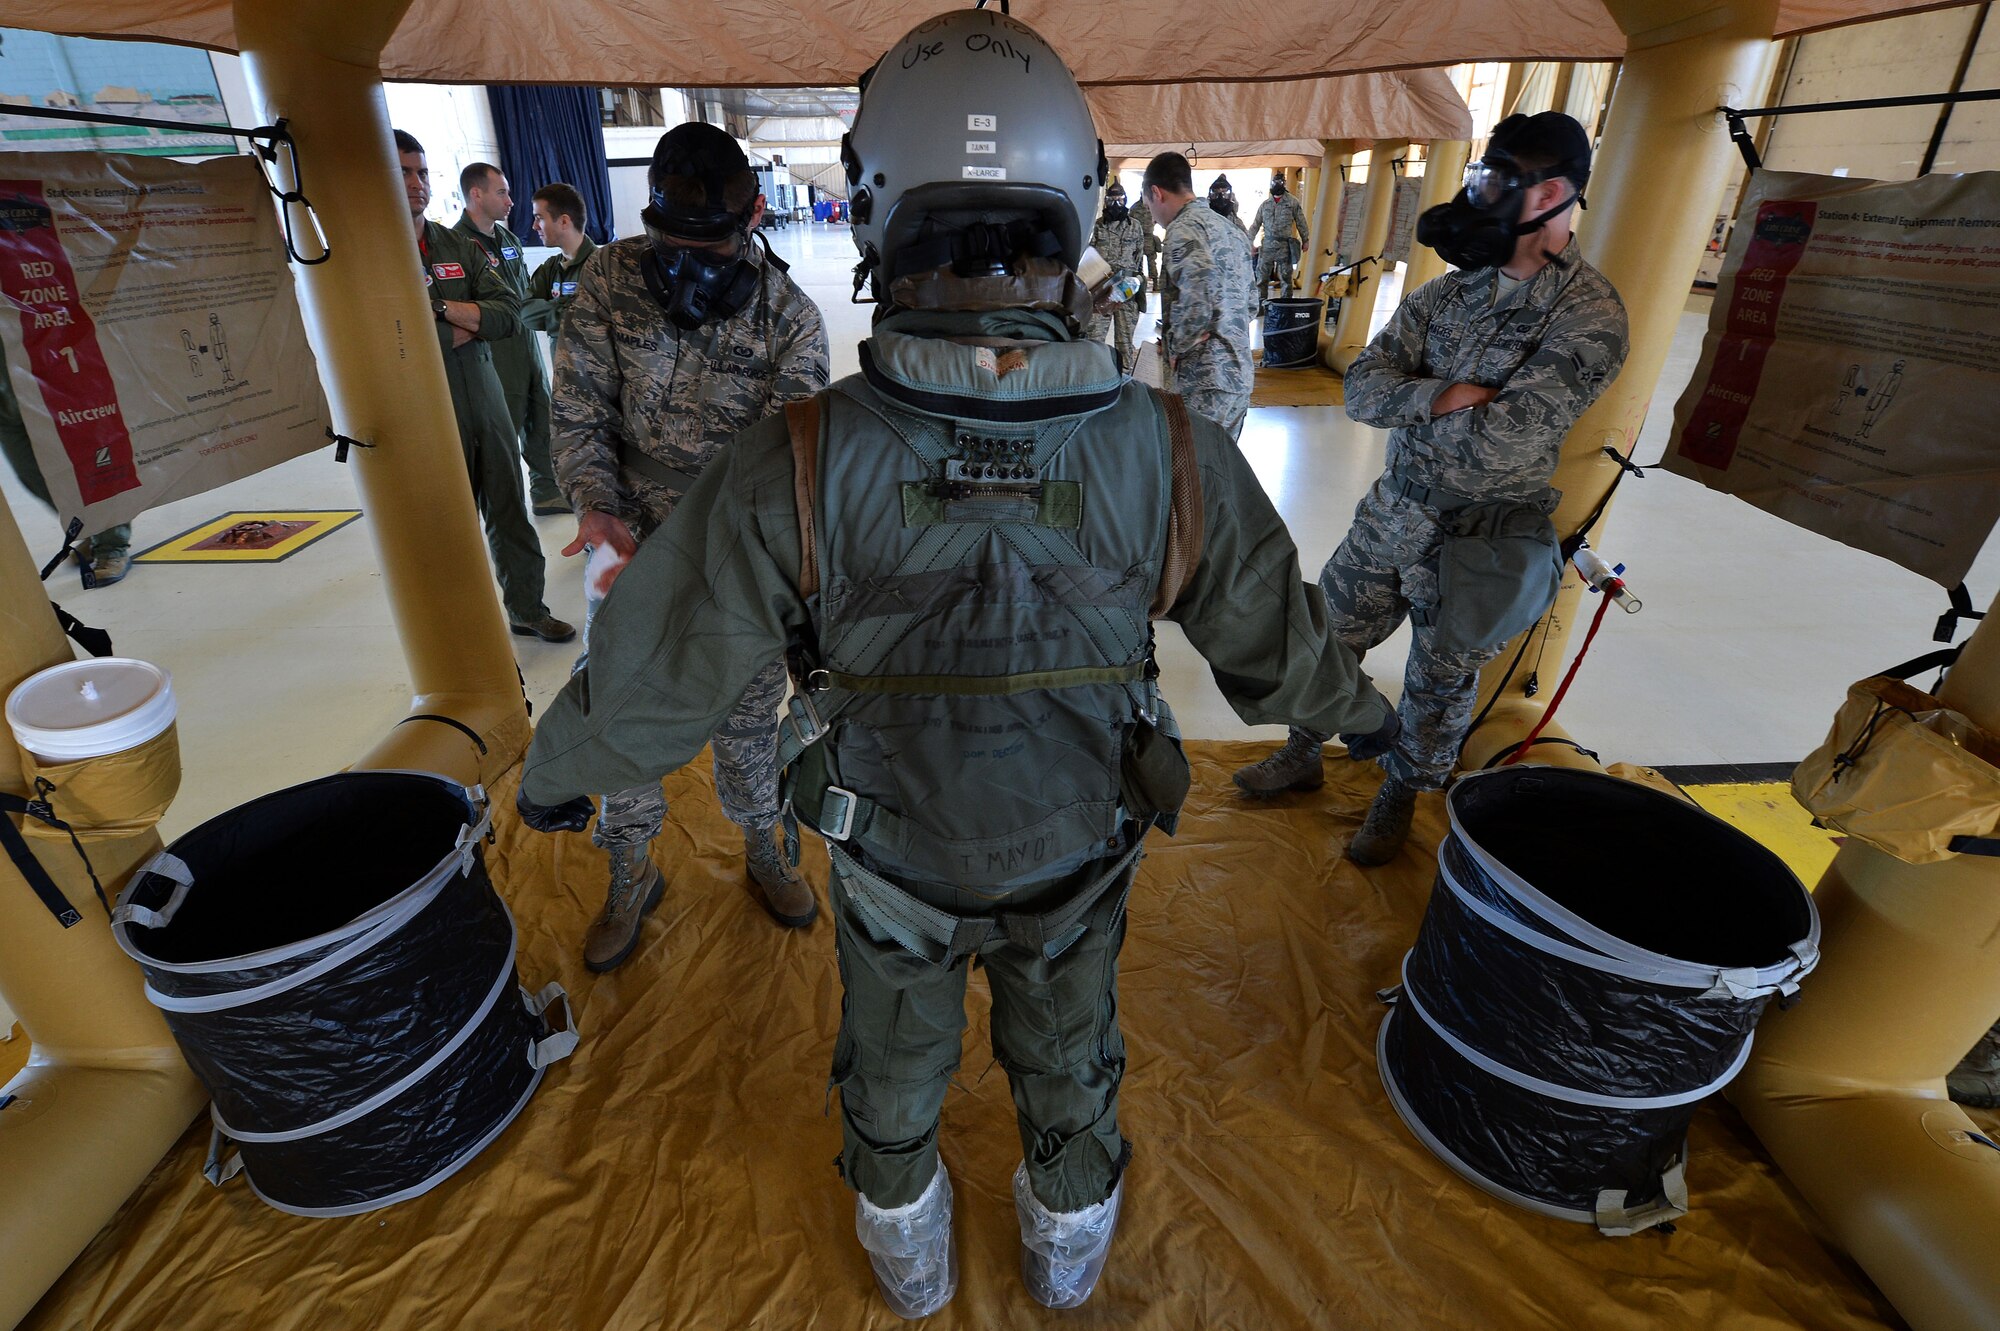 Airmen assigned to the 20th Operations Support Squadron mitigate a pilot during decontamination training at Shaw Air Force Base, S.C., Oct. 23, 2015. During the training, pilots and aircrew flight equipment Airmen practiced the actions they would take if a pilot became contaminated during flight. (U.S. Air Force photo/Senior Airman Michael Cossaboom)